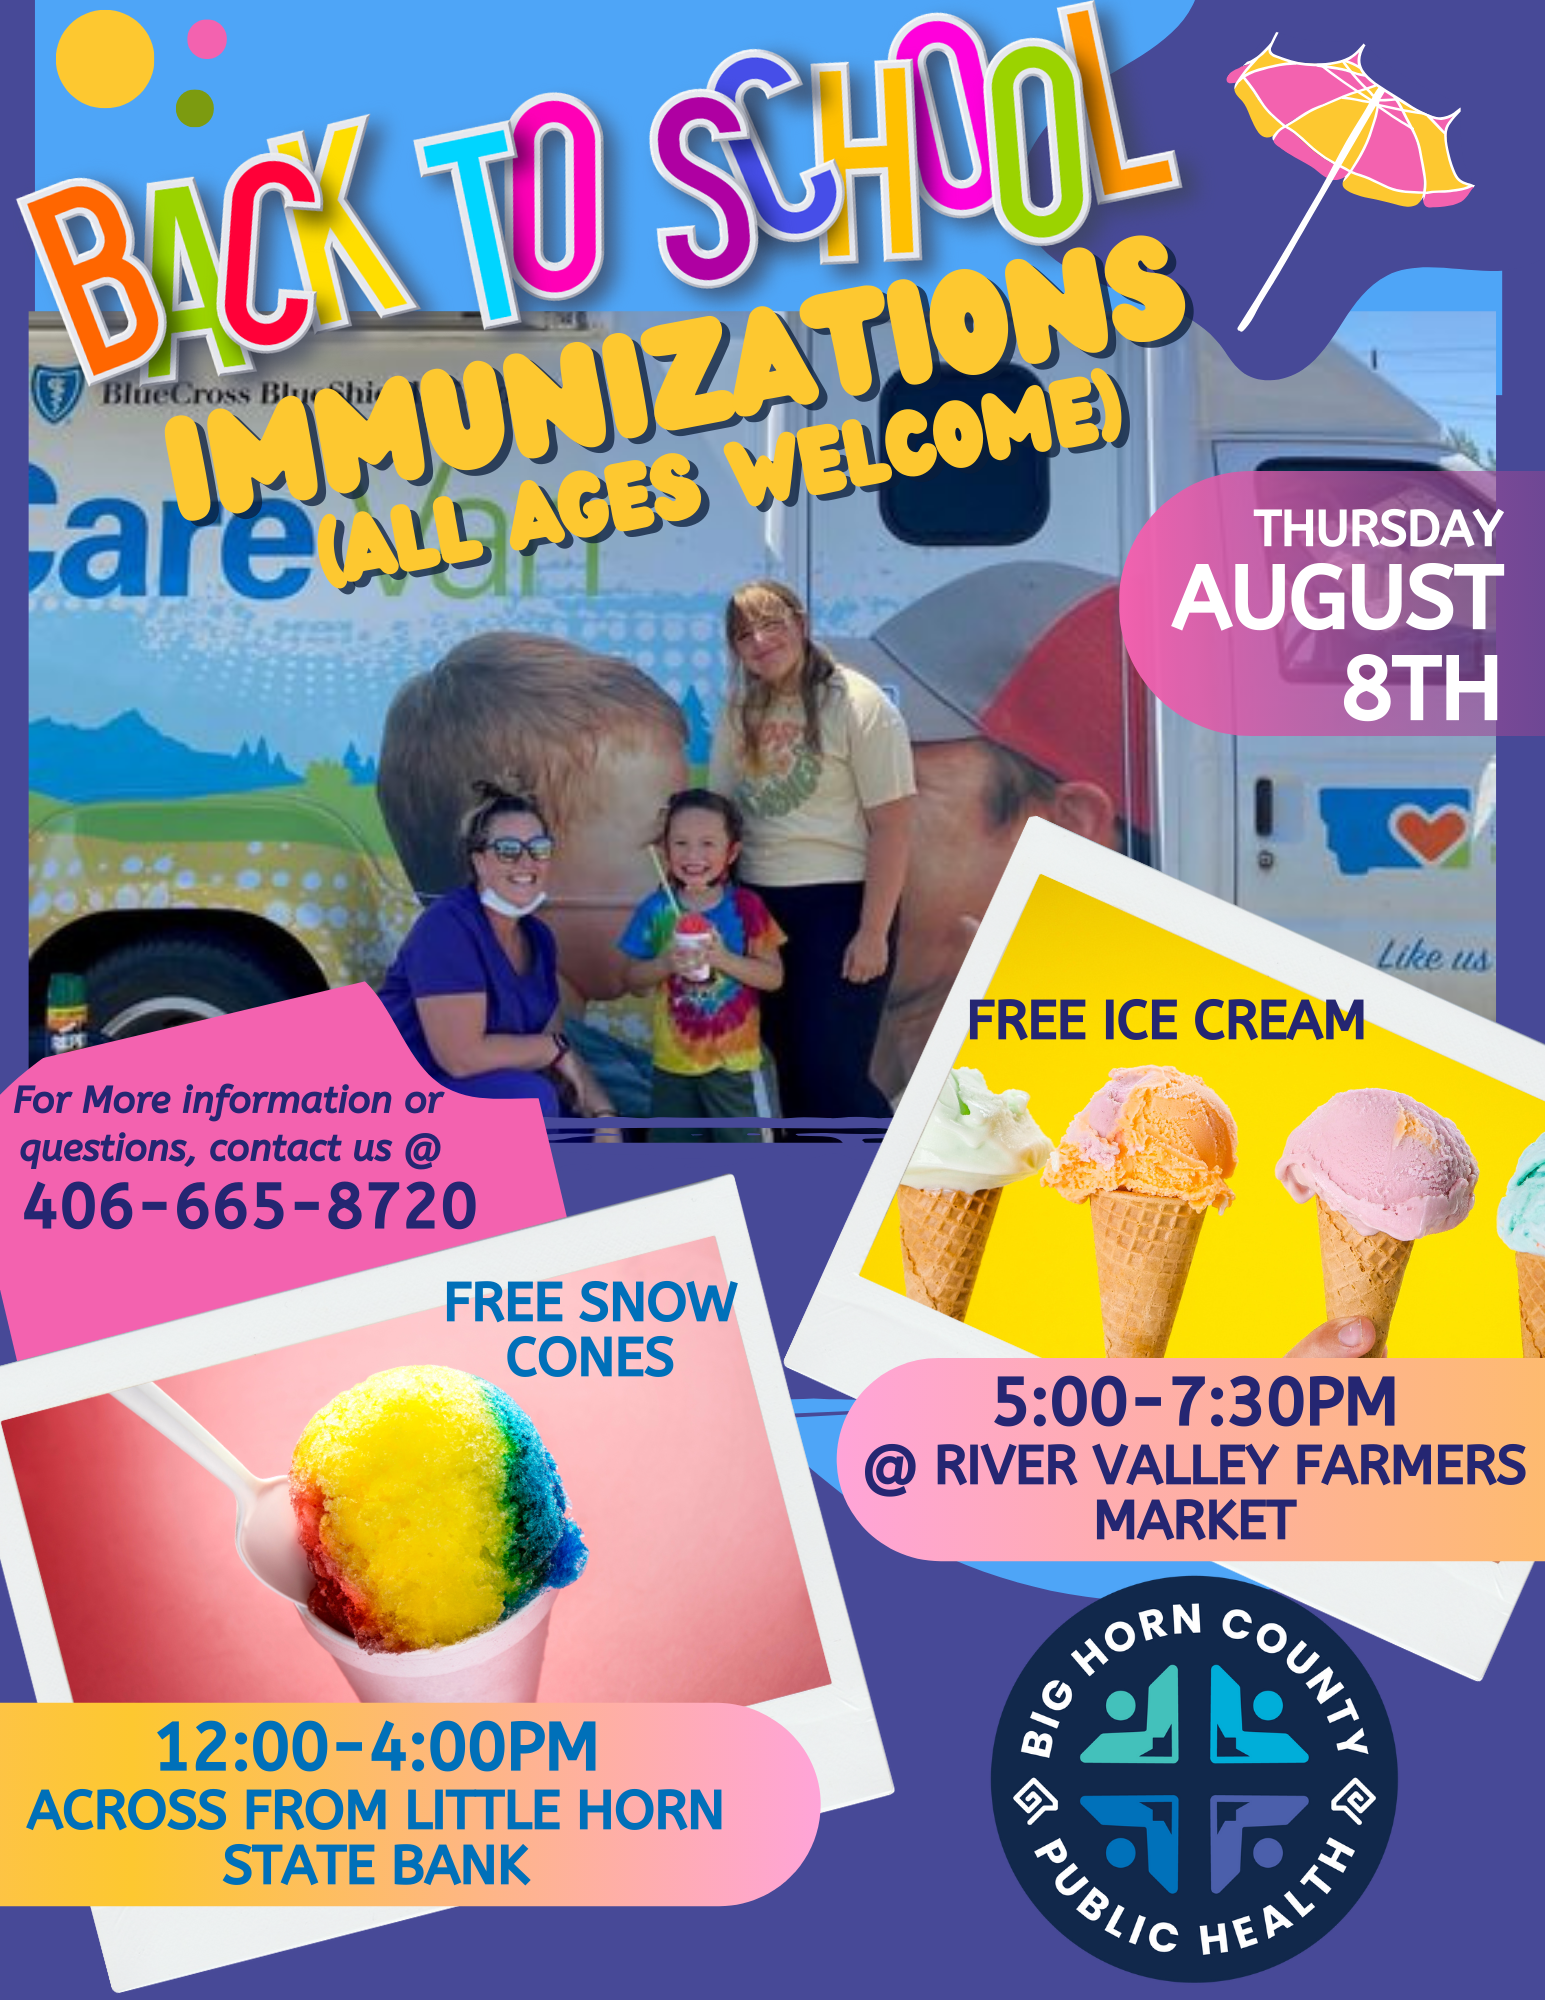 Big Horn County Public Health Back to School Immunizations.  All ages welcome.  12:00 - 4:00pm. Across from Little Horn State Bank. Free Snow Cones!  5:00 - 7:30pm. River Valley Farmer's Market. Free Ice Cream!  For more information or questions,  contact (406) 665-8720